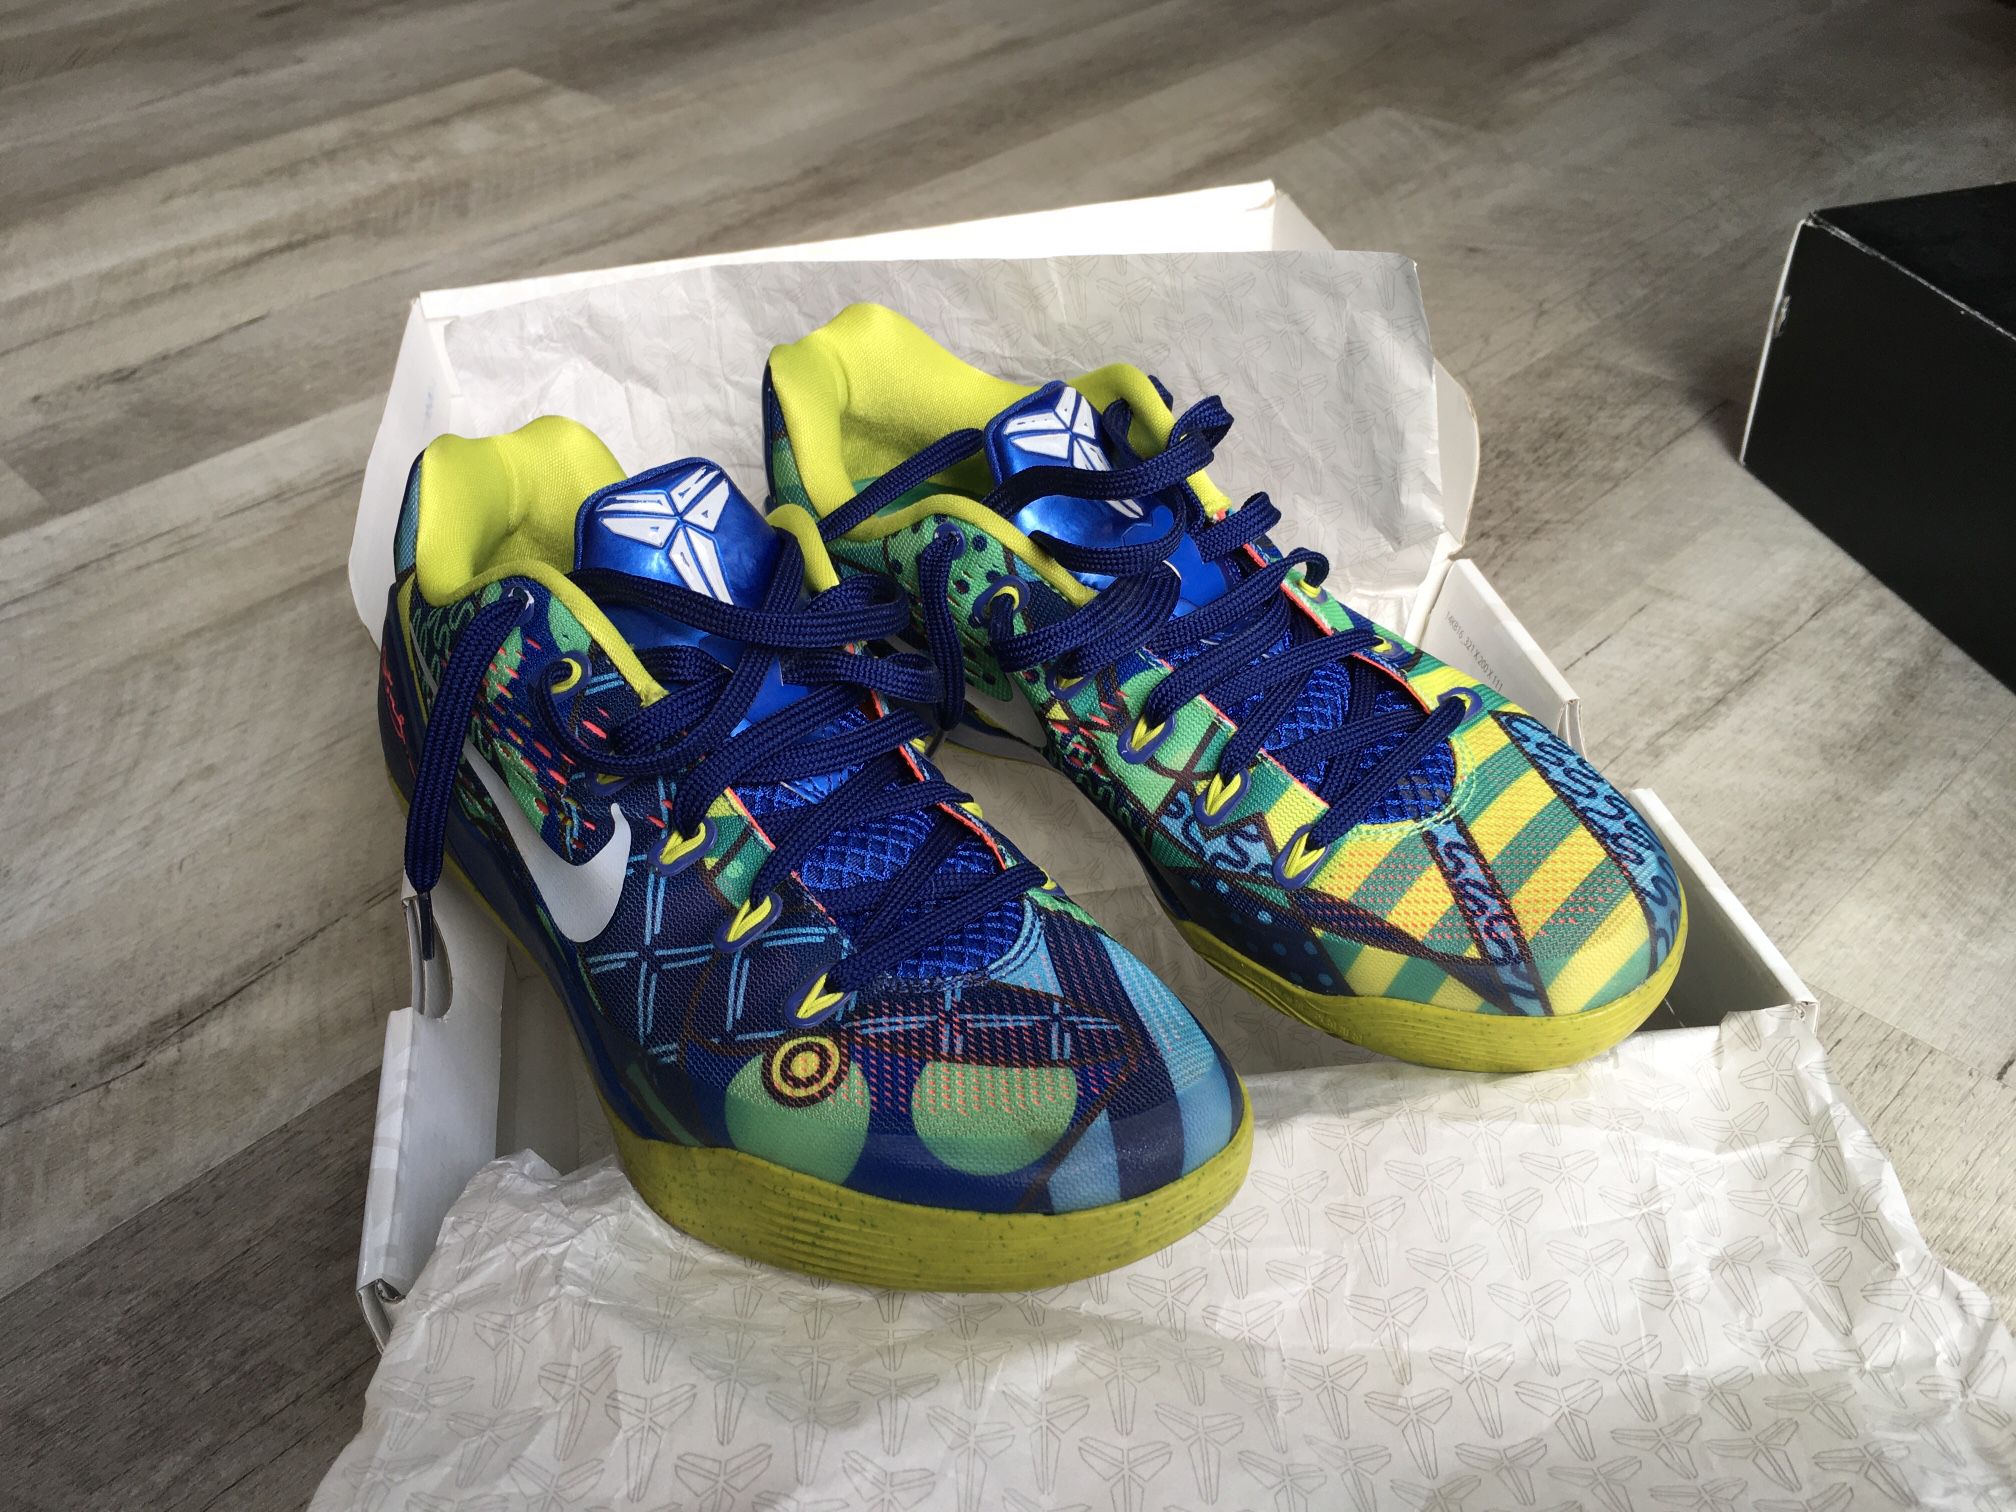 Excellent Used Condition Nike Air Kobe 9 Low “Brazil”. Men Size 8.5